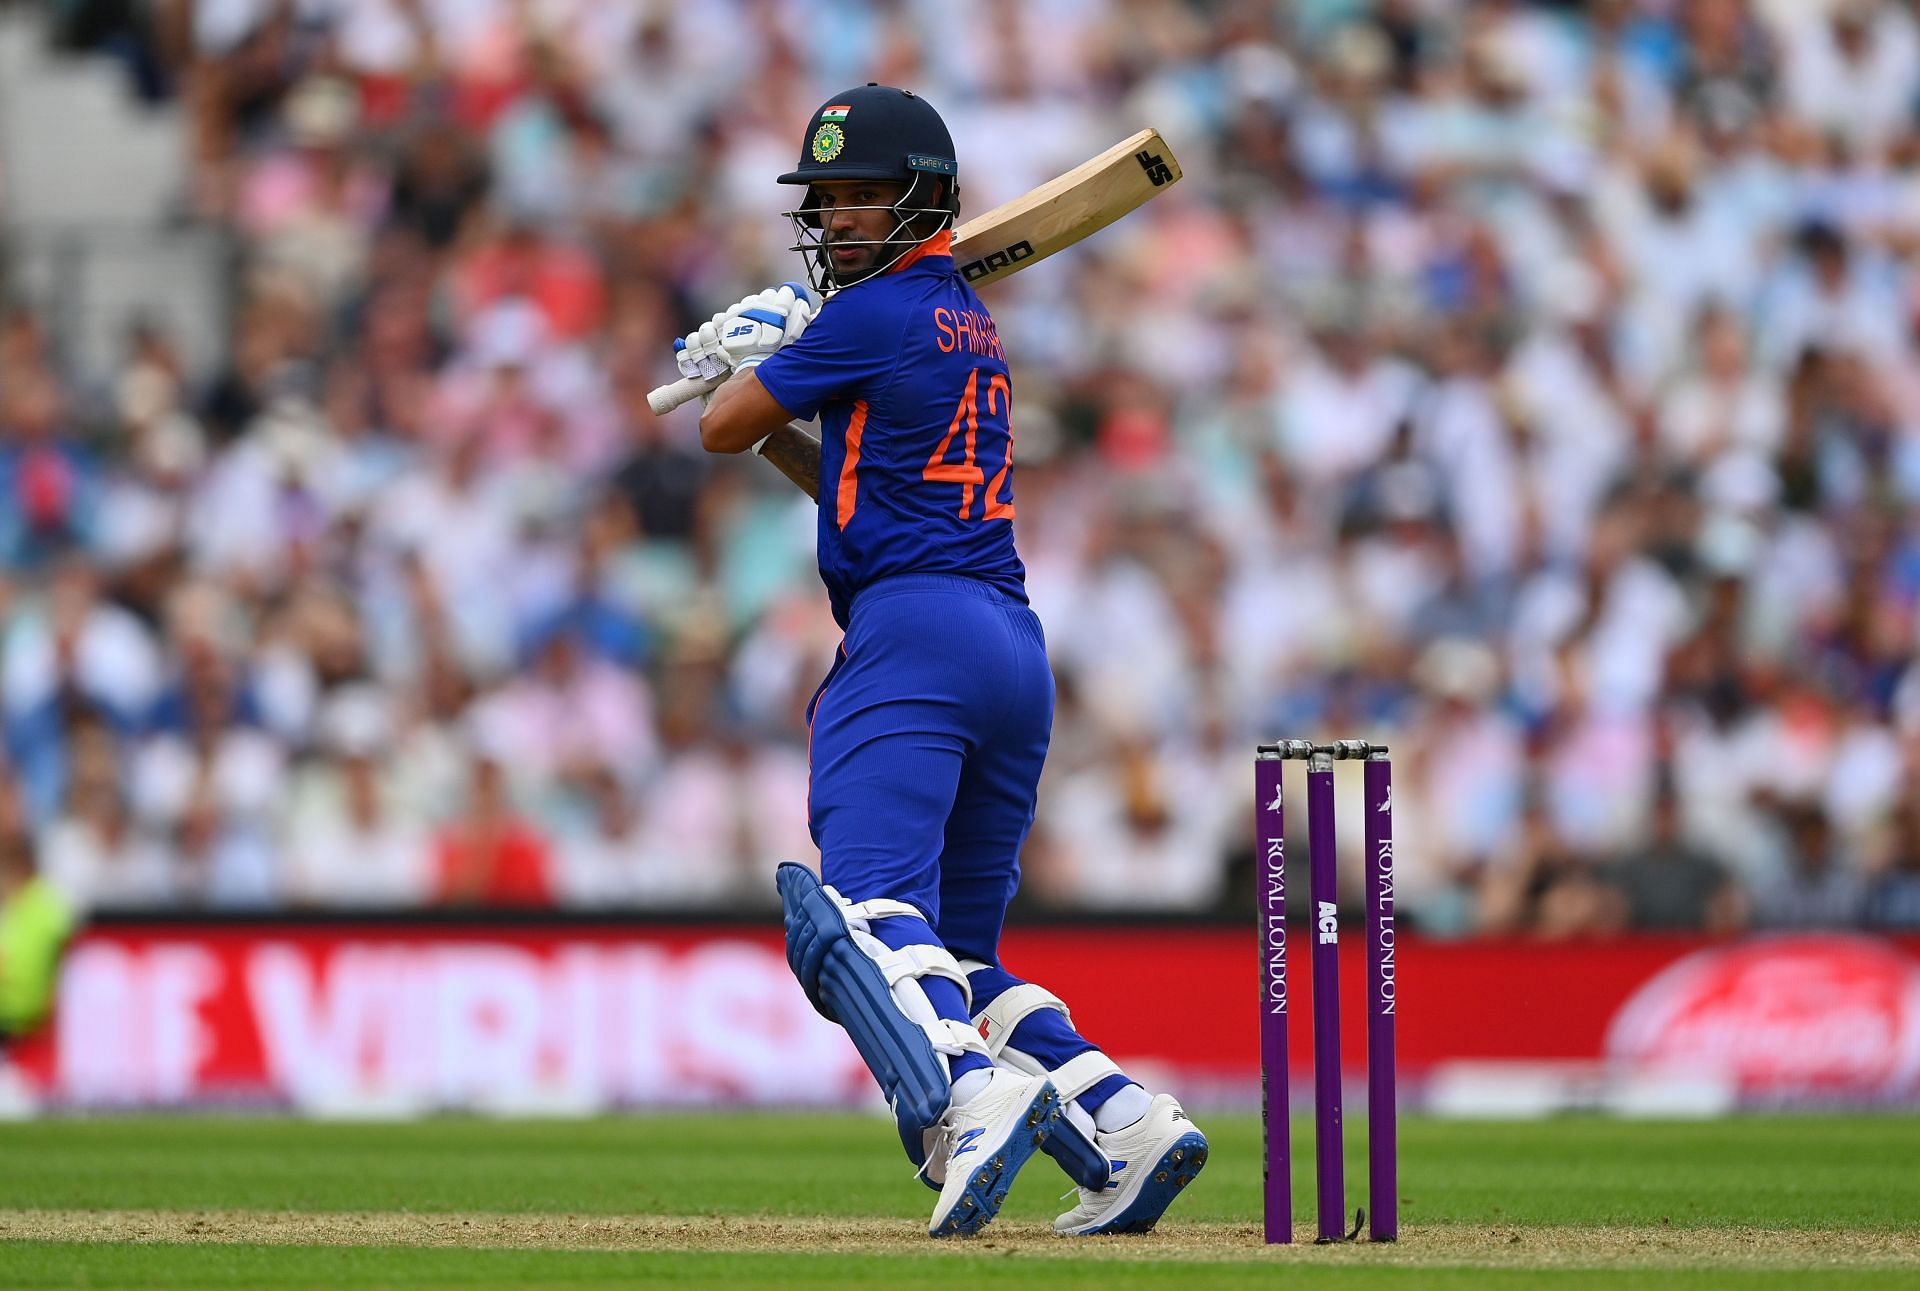 Shikhar Dhawan registered a highest score of 31* in the ODI series in England. Pic: Getty Images